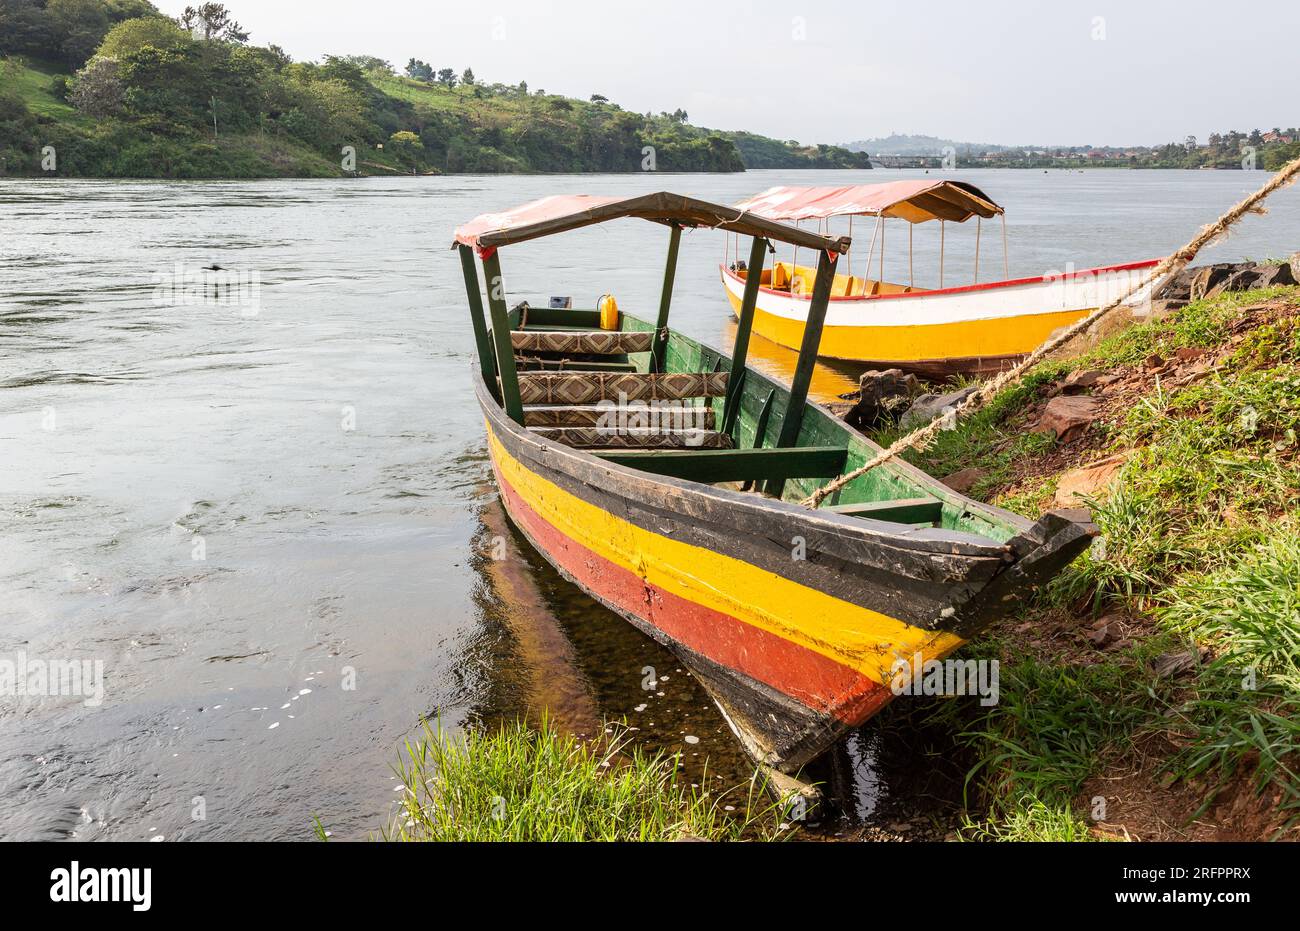 Two wooden boats, painted in bright colors, await tourists for an excursion on the nascent Nile. Jinja, Uganda. Stock Photo